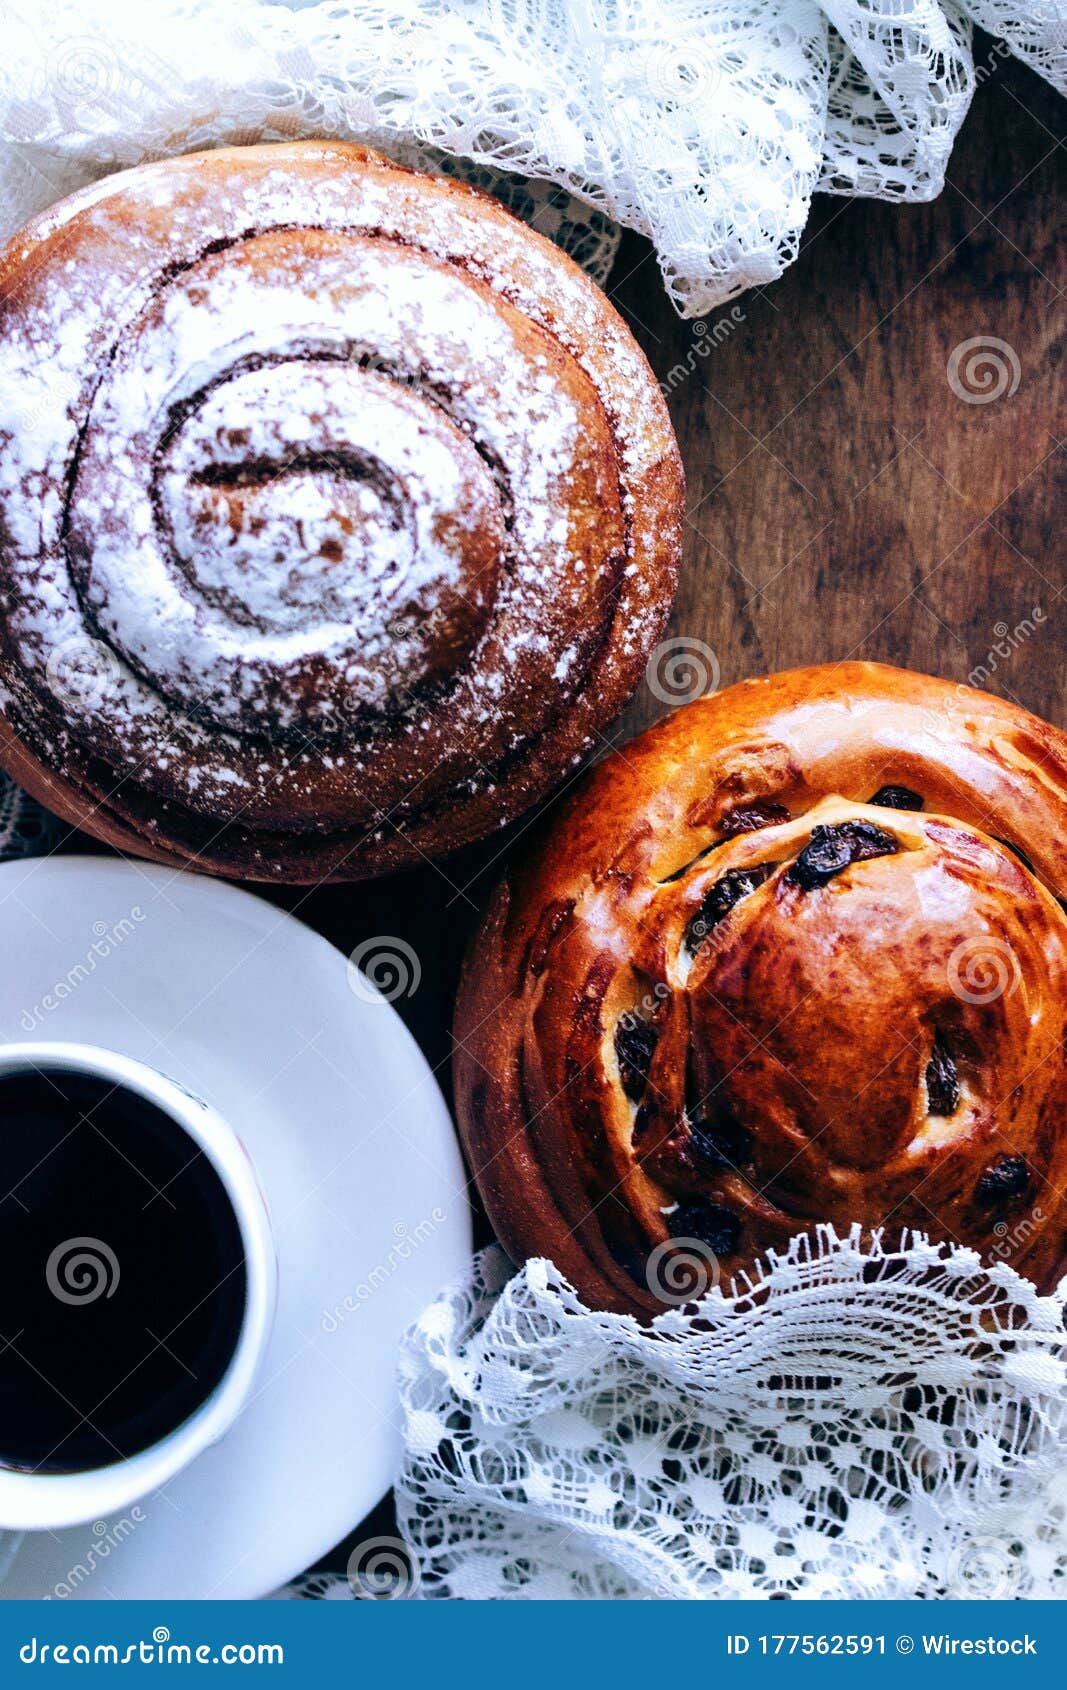 fresh pastries and coffee